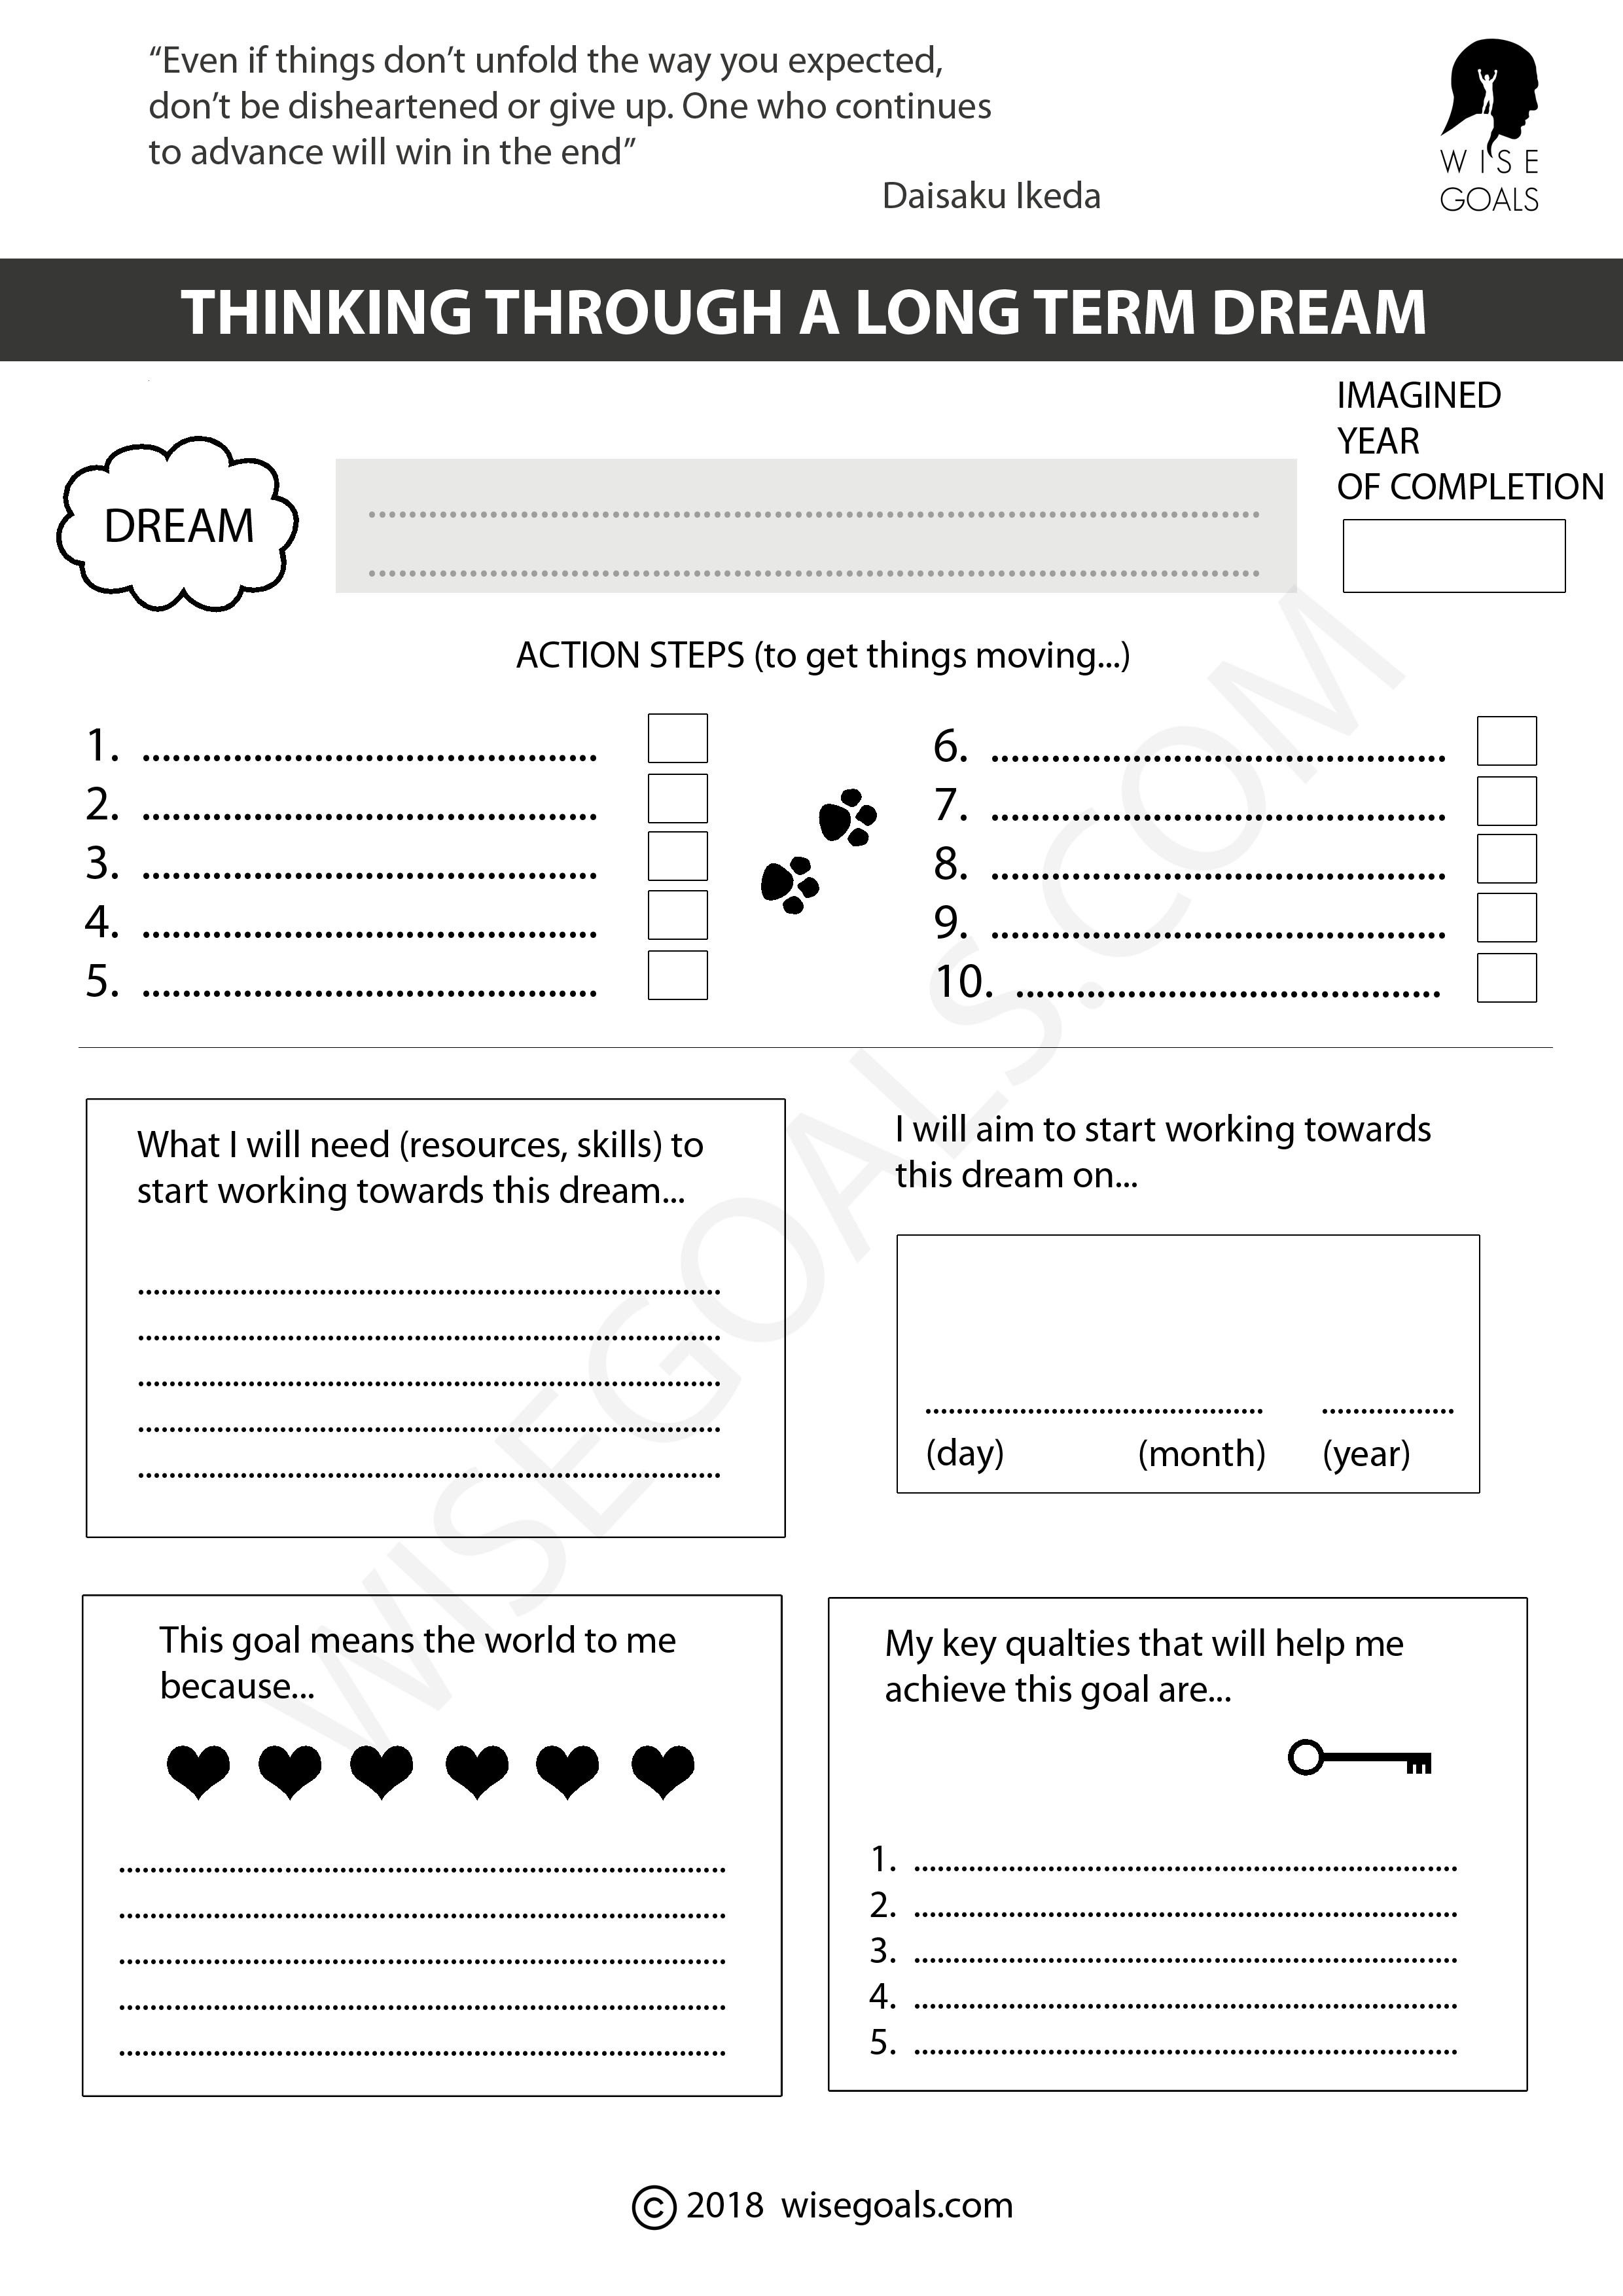 Goals and Accomplishments Template 6 Useful Goal Setting Templates and E Step Closer to